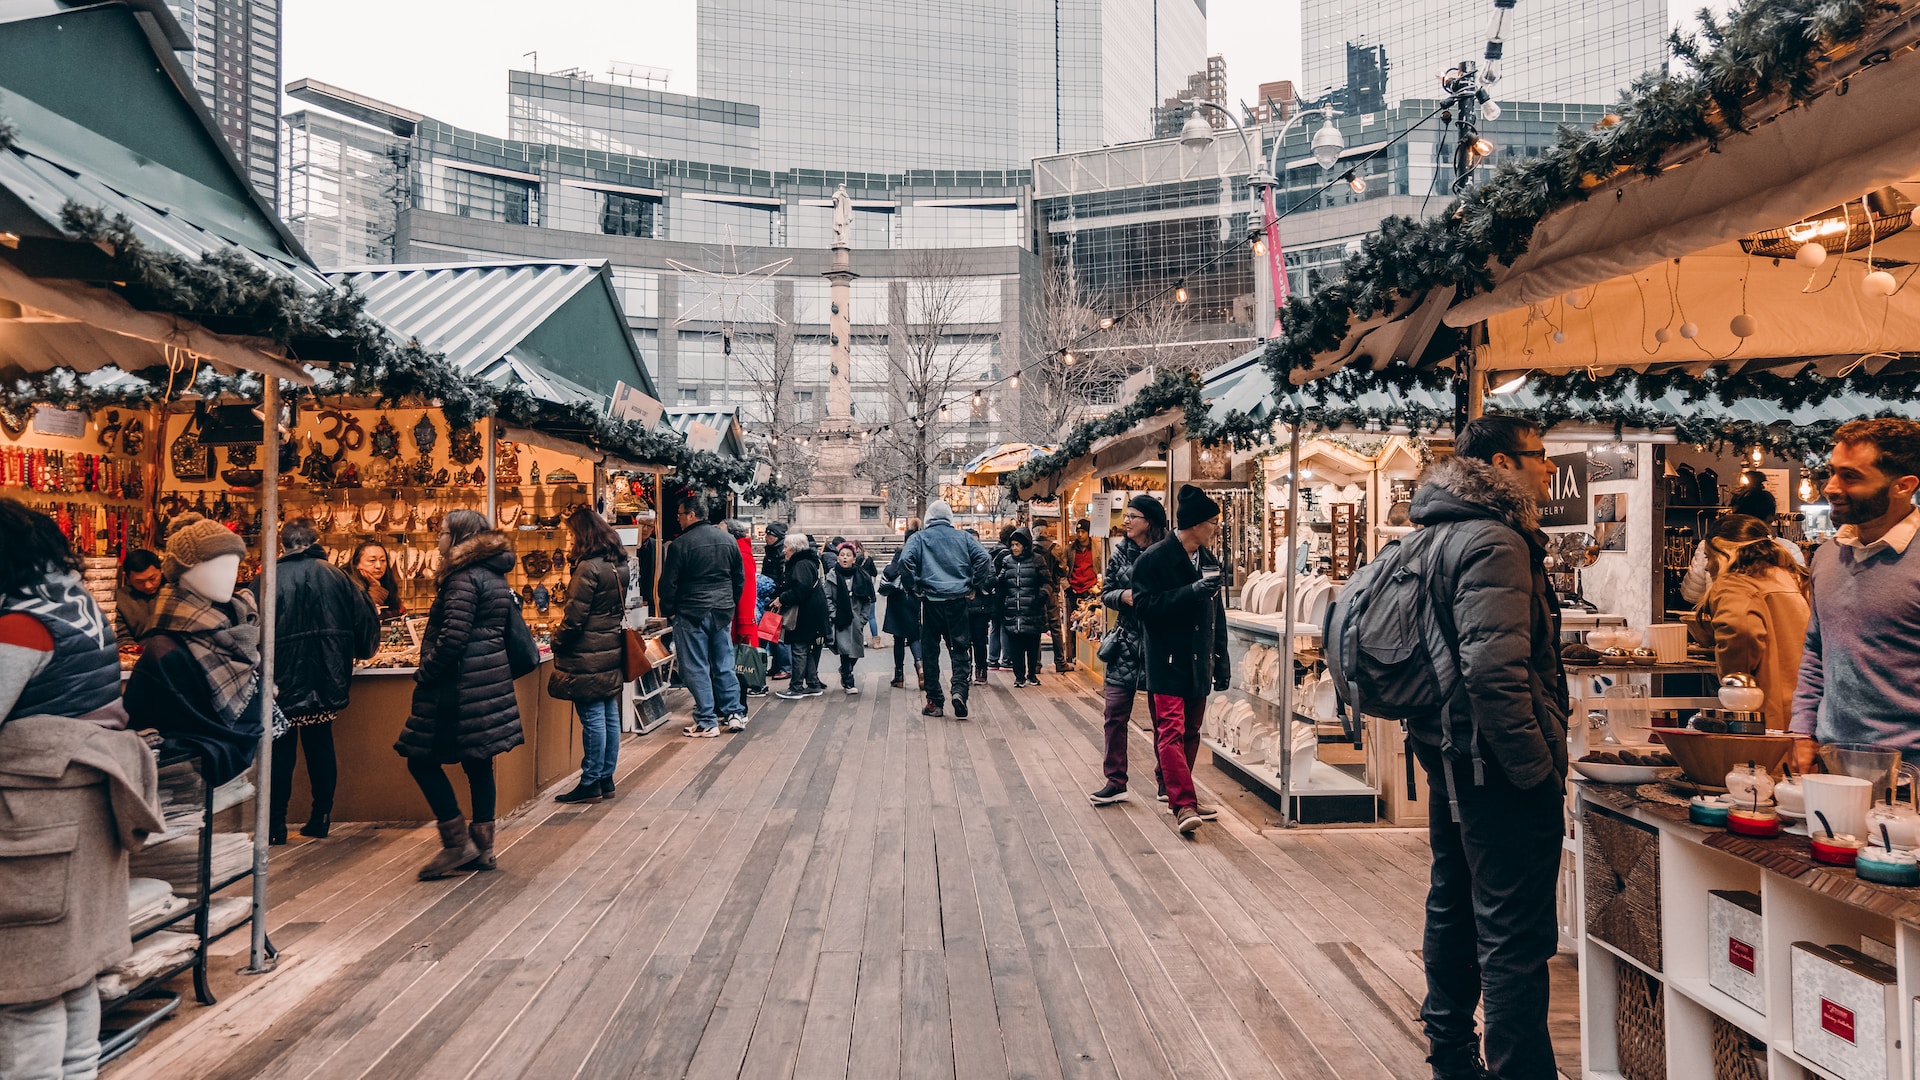 Here is a Christmas market in New York.